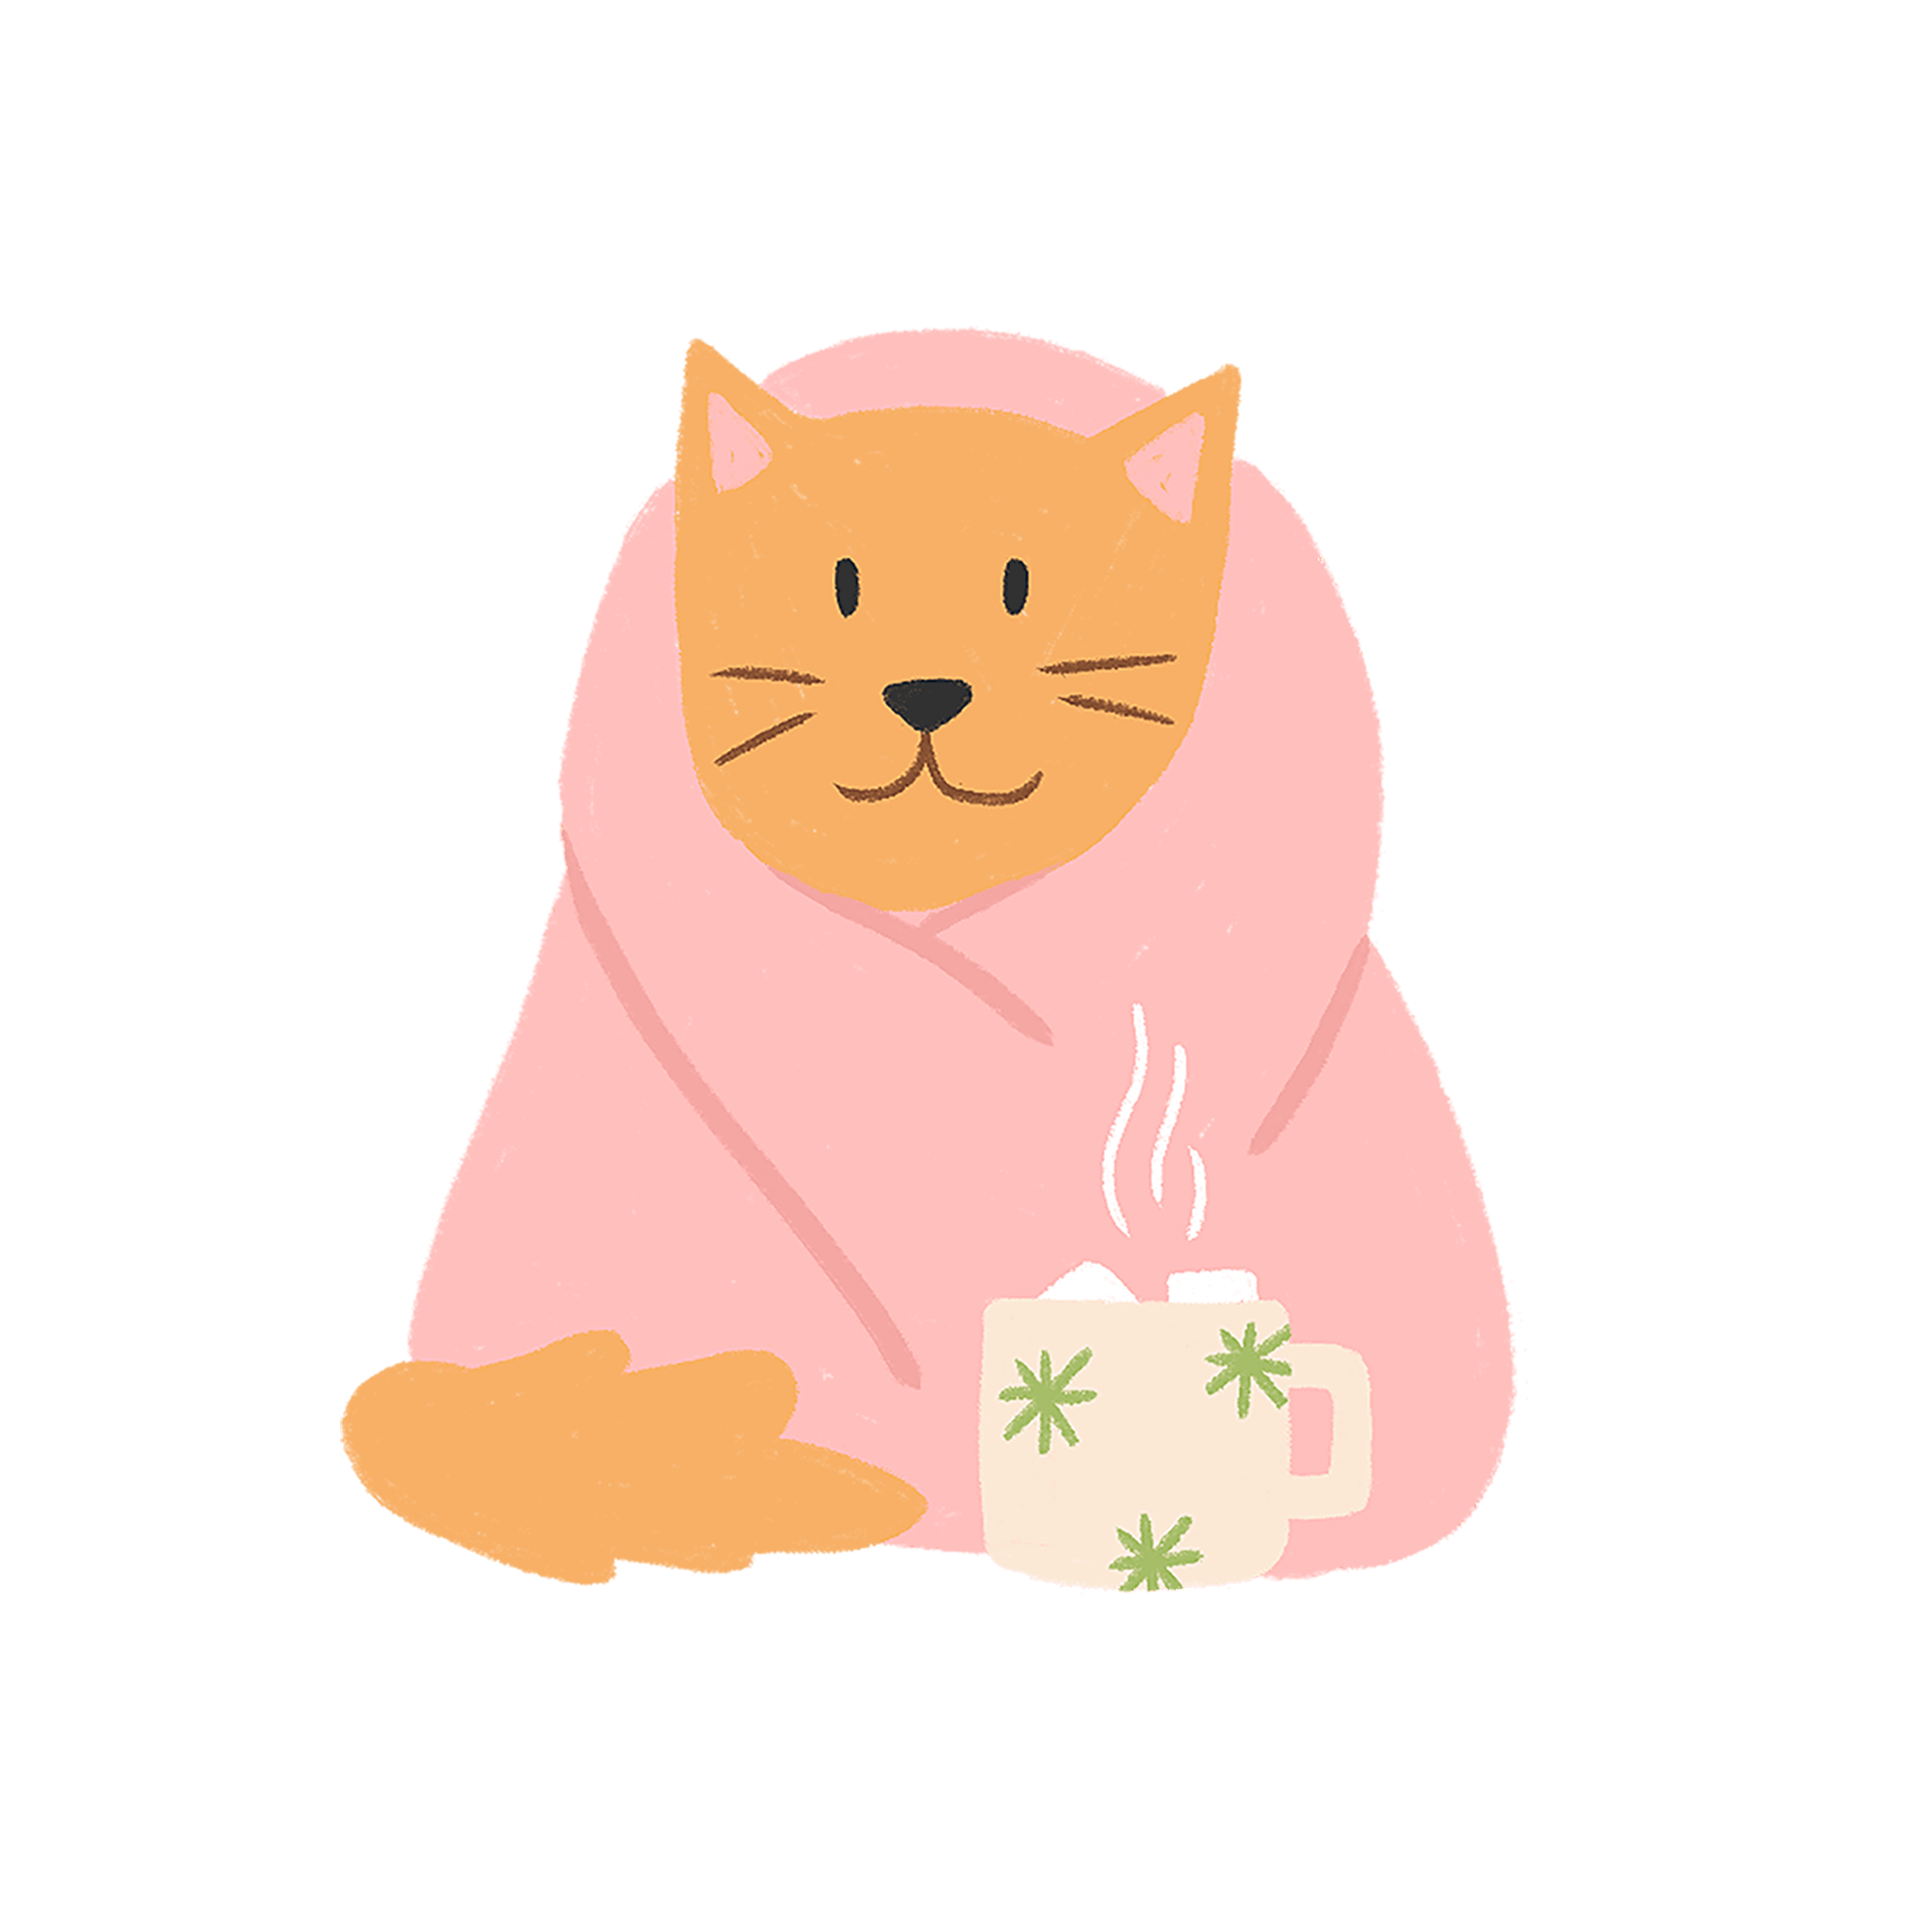 An illustration of an orange cat swaddled in a pink blanket, with a mug of hot cocoa next to it